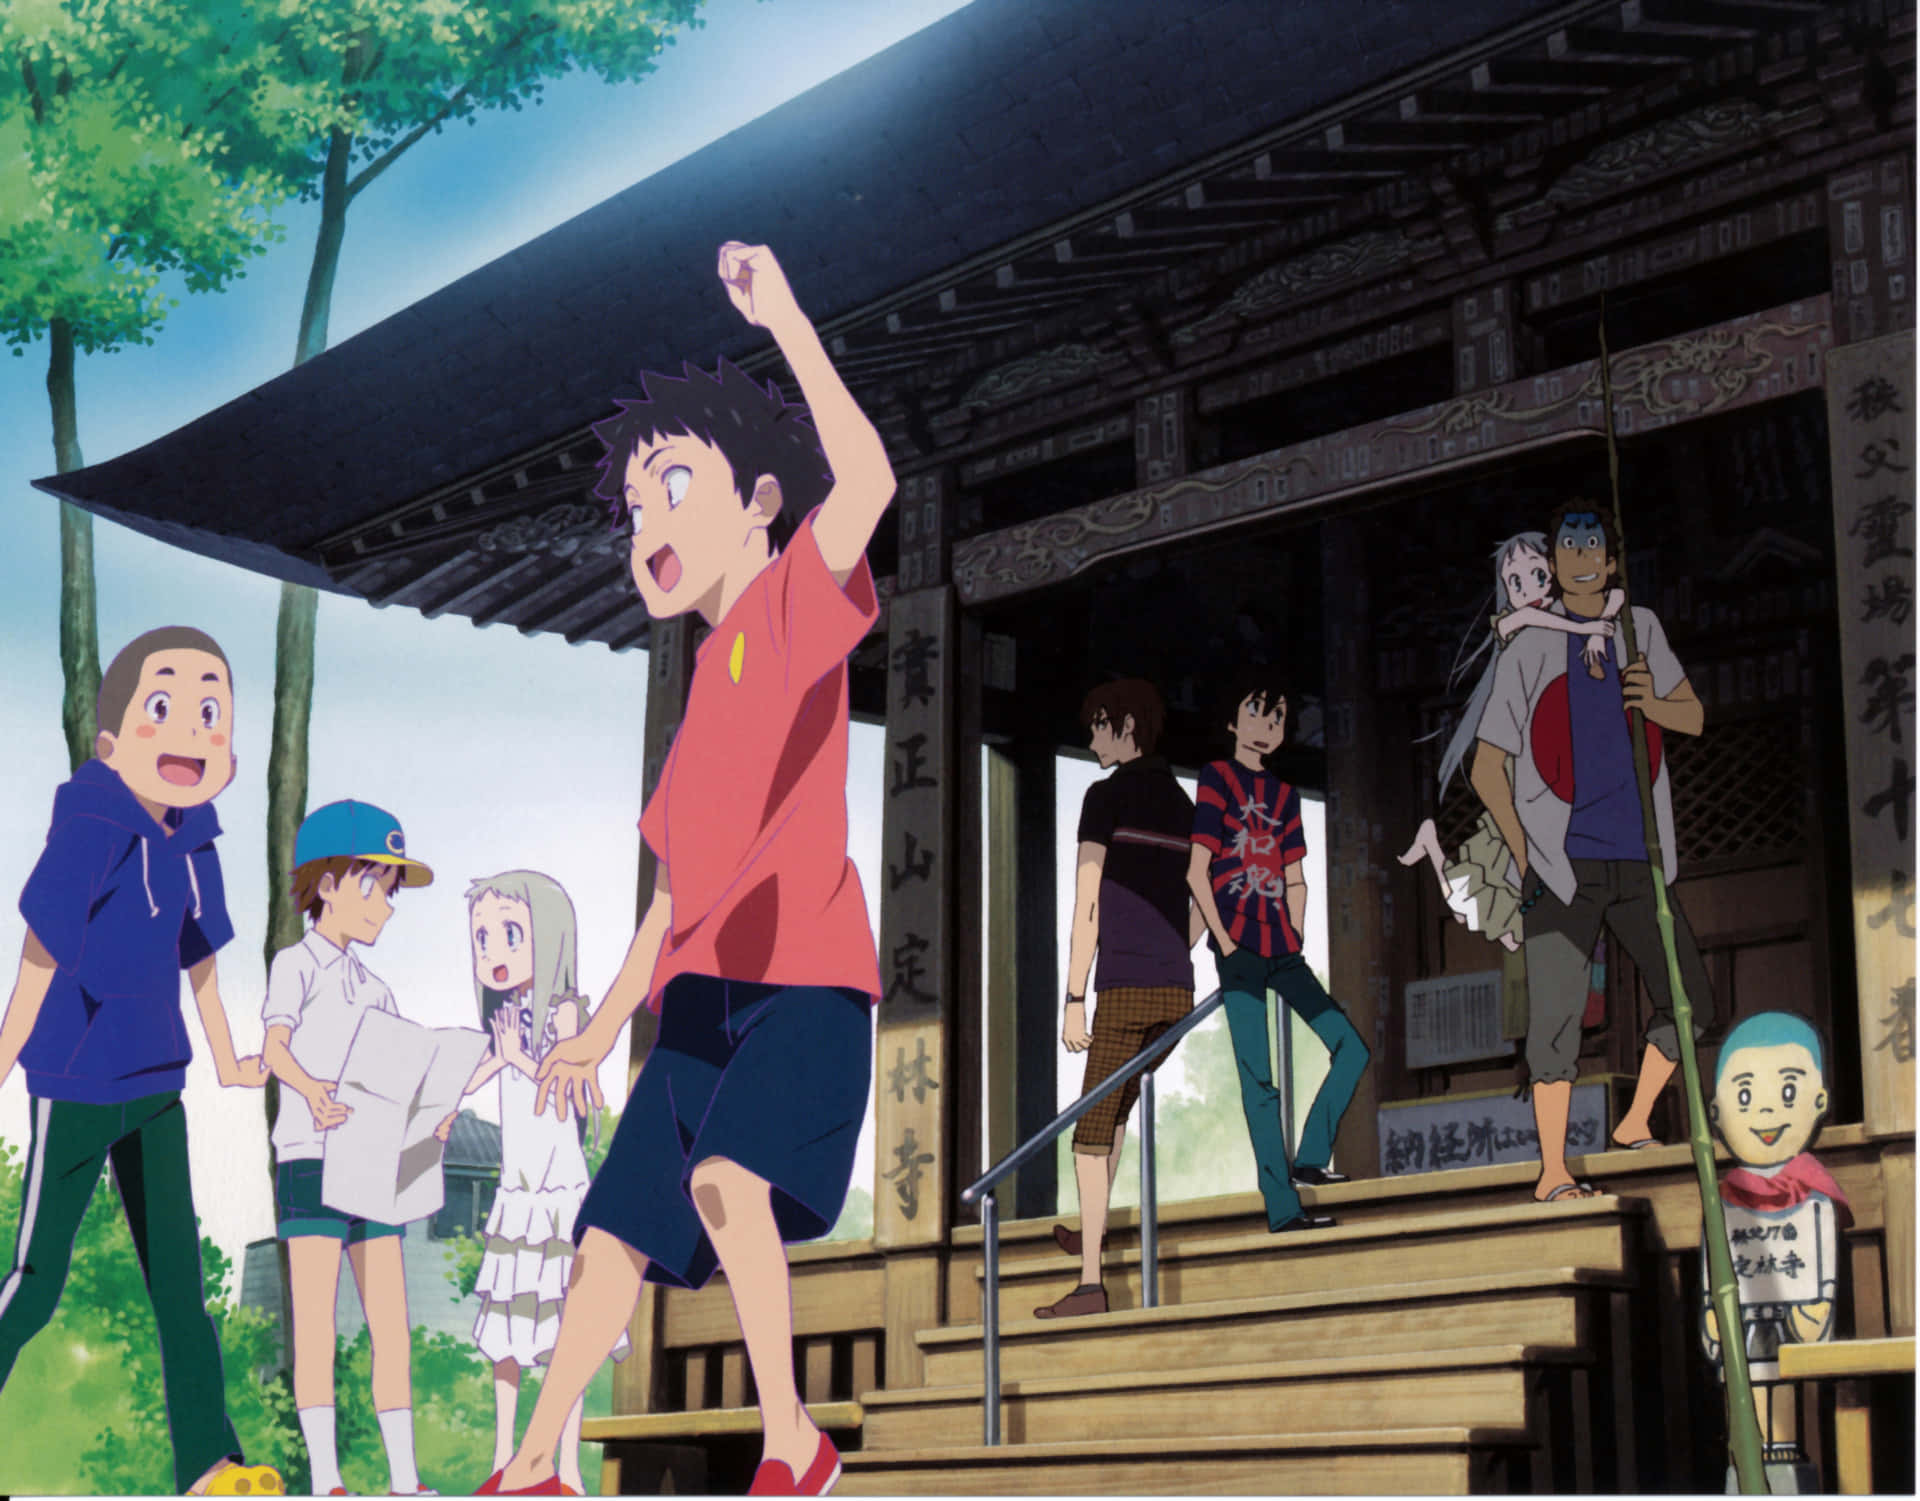 The Anohana characters gather to reminisce their childhood memories